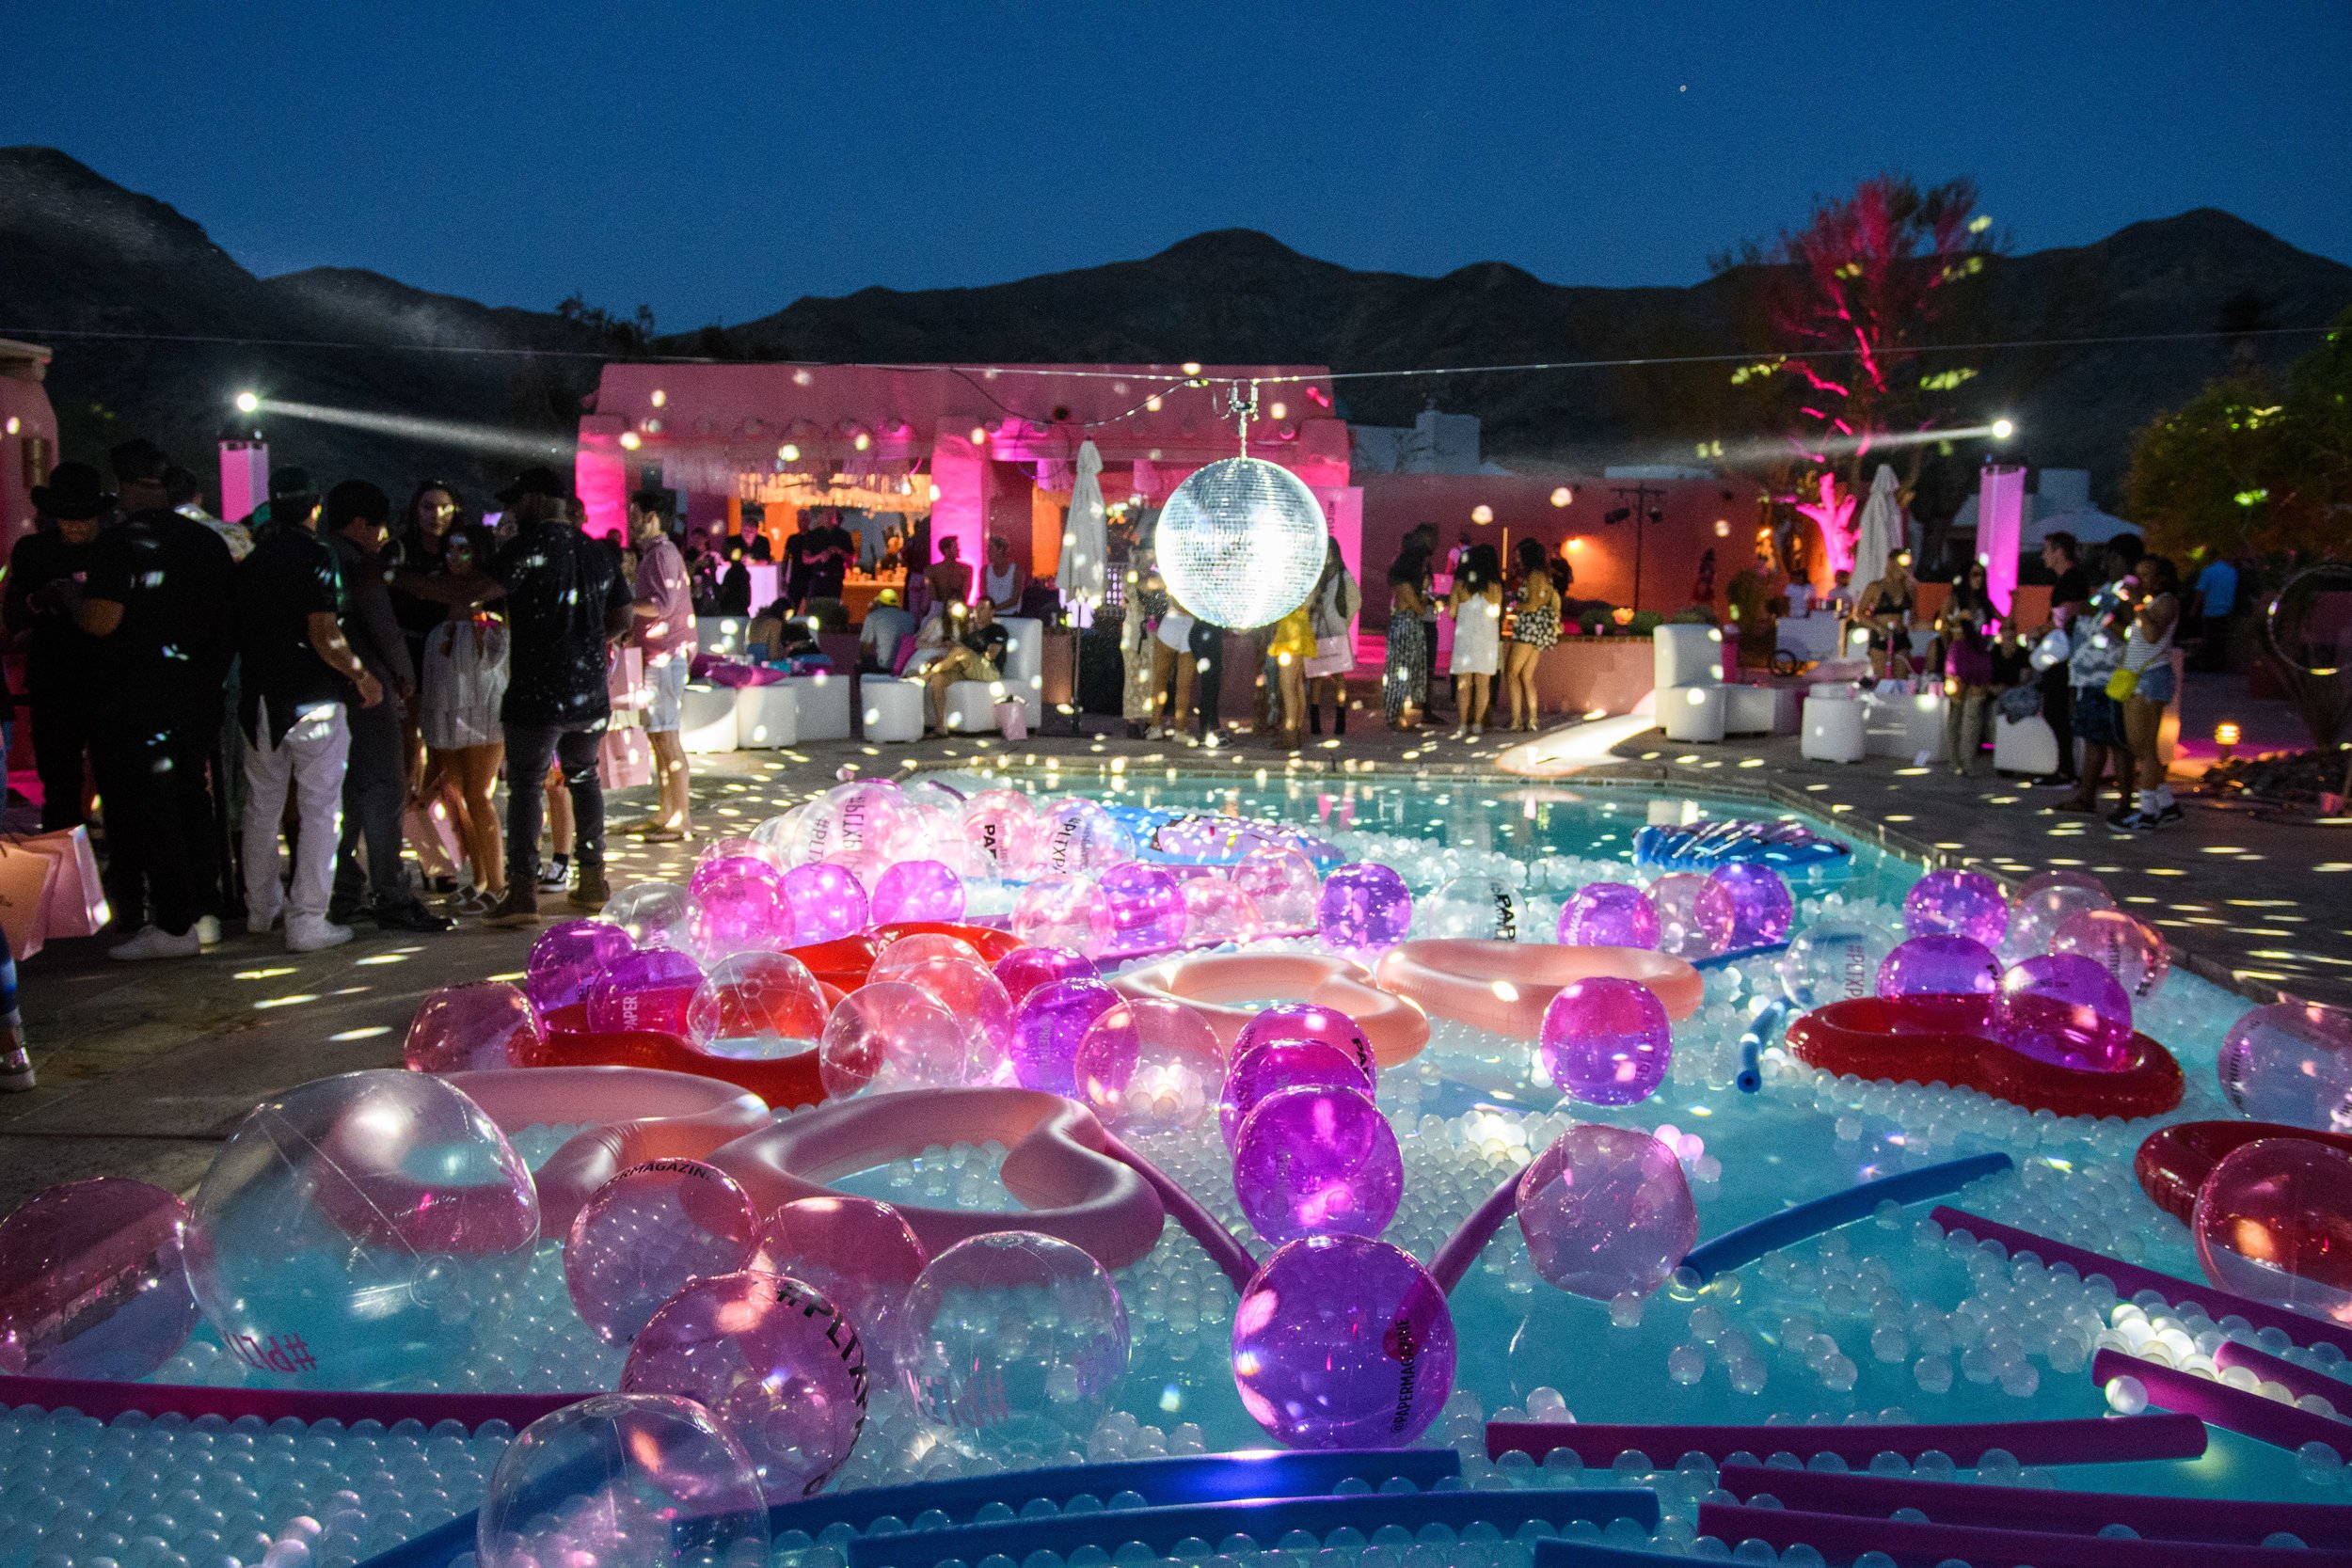 Ultimate Hollywood Coachella Poolside Party disco ball spins above the pool.jpg